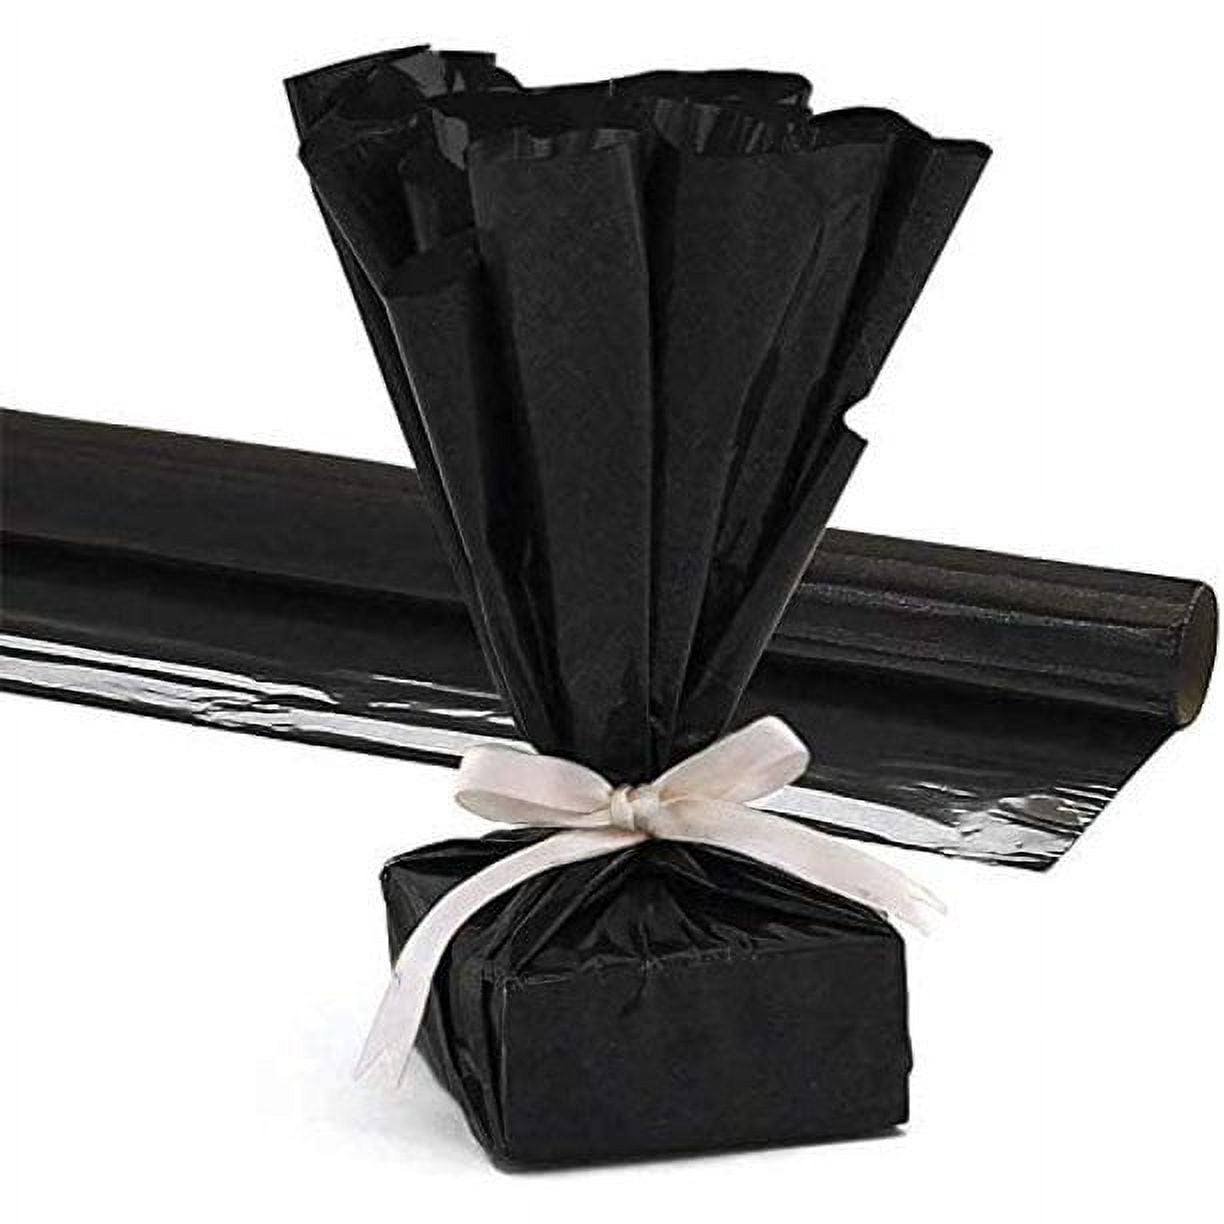 100 pcs of Thin Black Paper - Art 14 x 20 inch Recyclable Black Wrapping  Paper, Birthday DIY festivals Gift Wrap